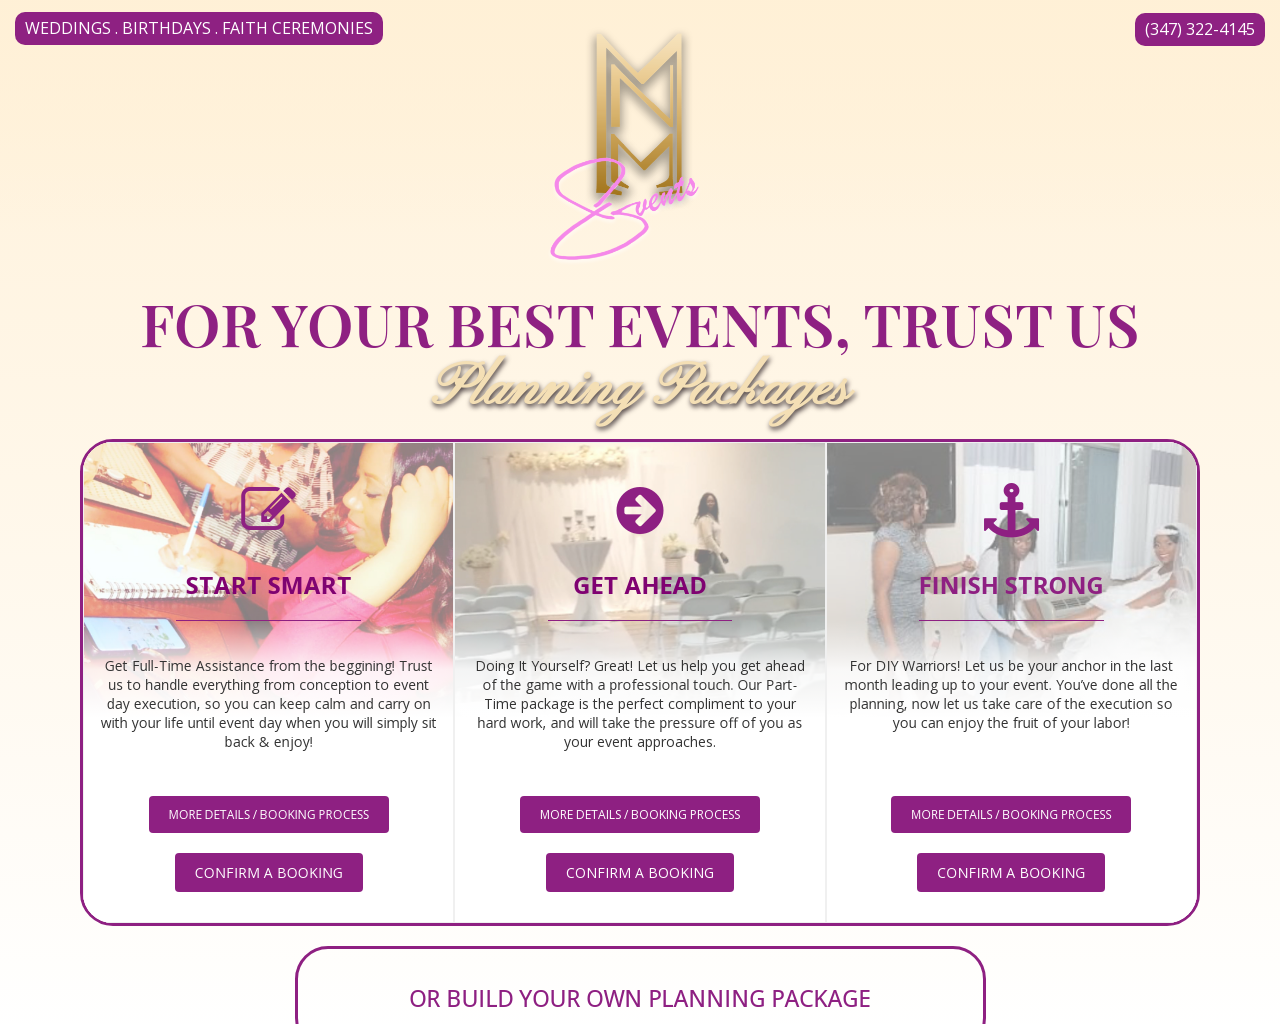 Desktop view of the event planner’s website designed and developed by urbane strategies.